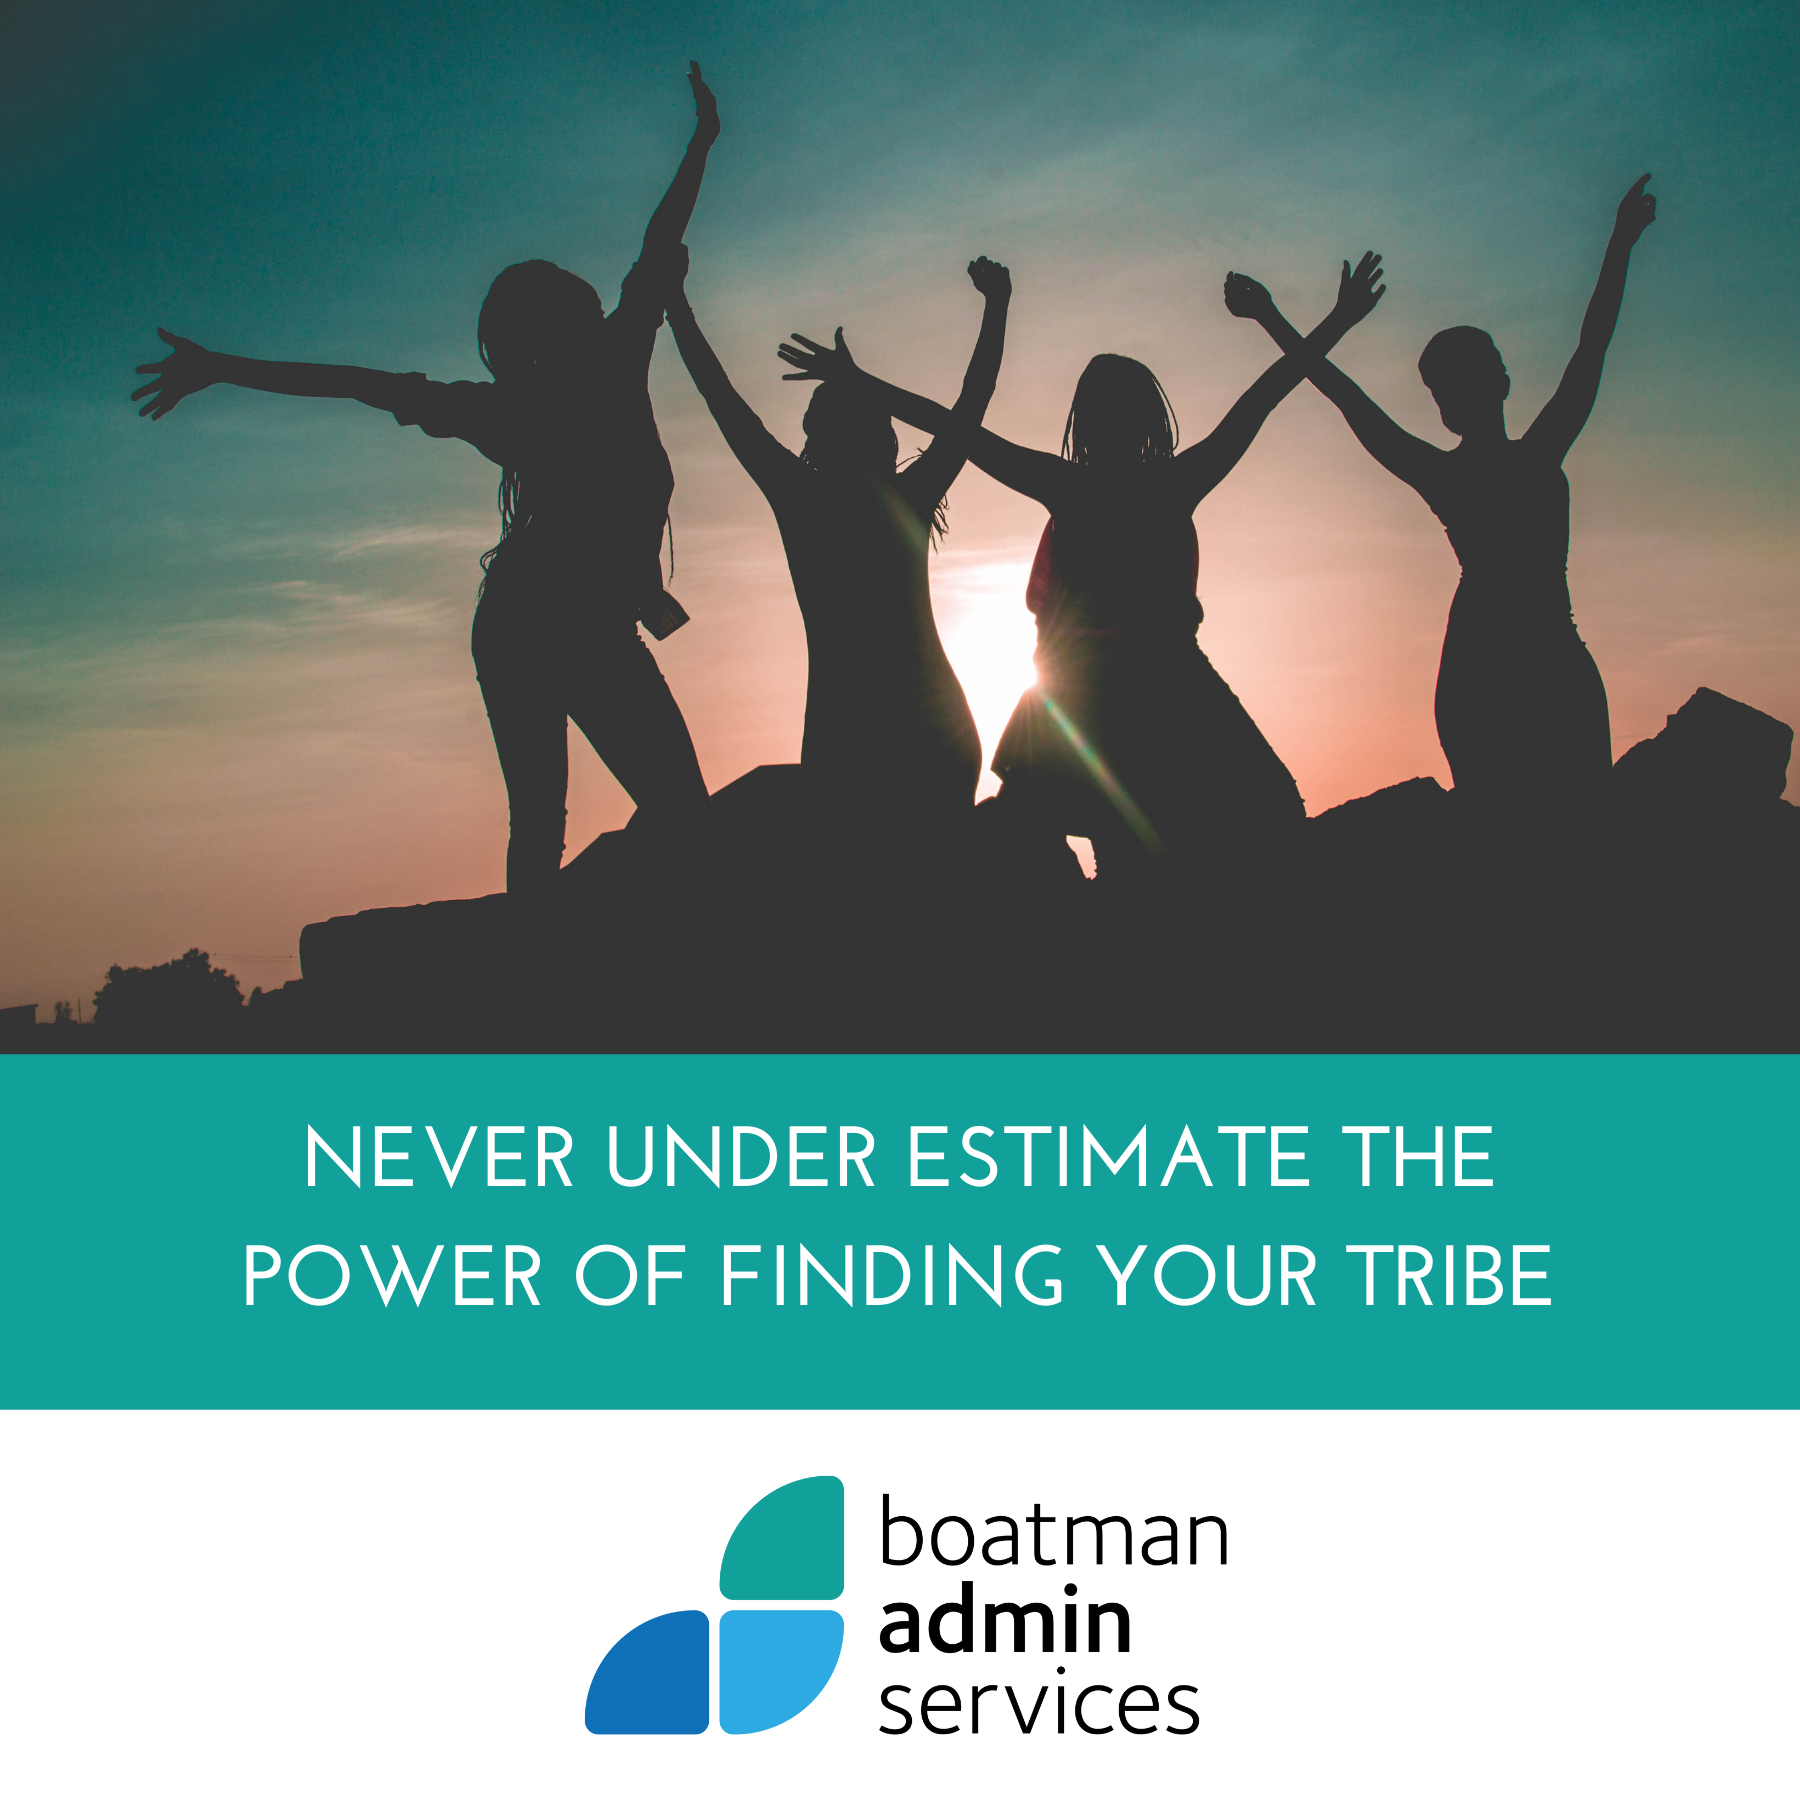 Never under estimate the power of finding your tribe